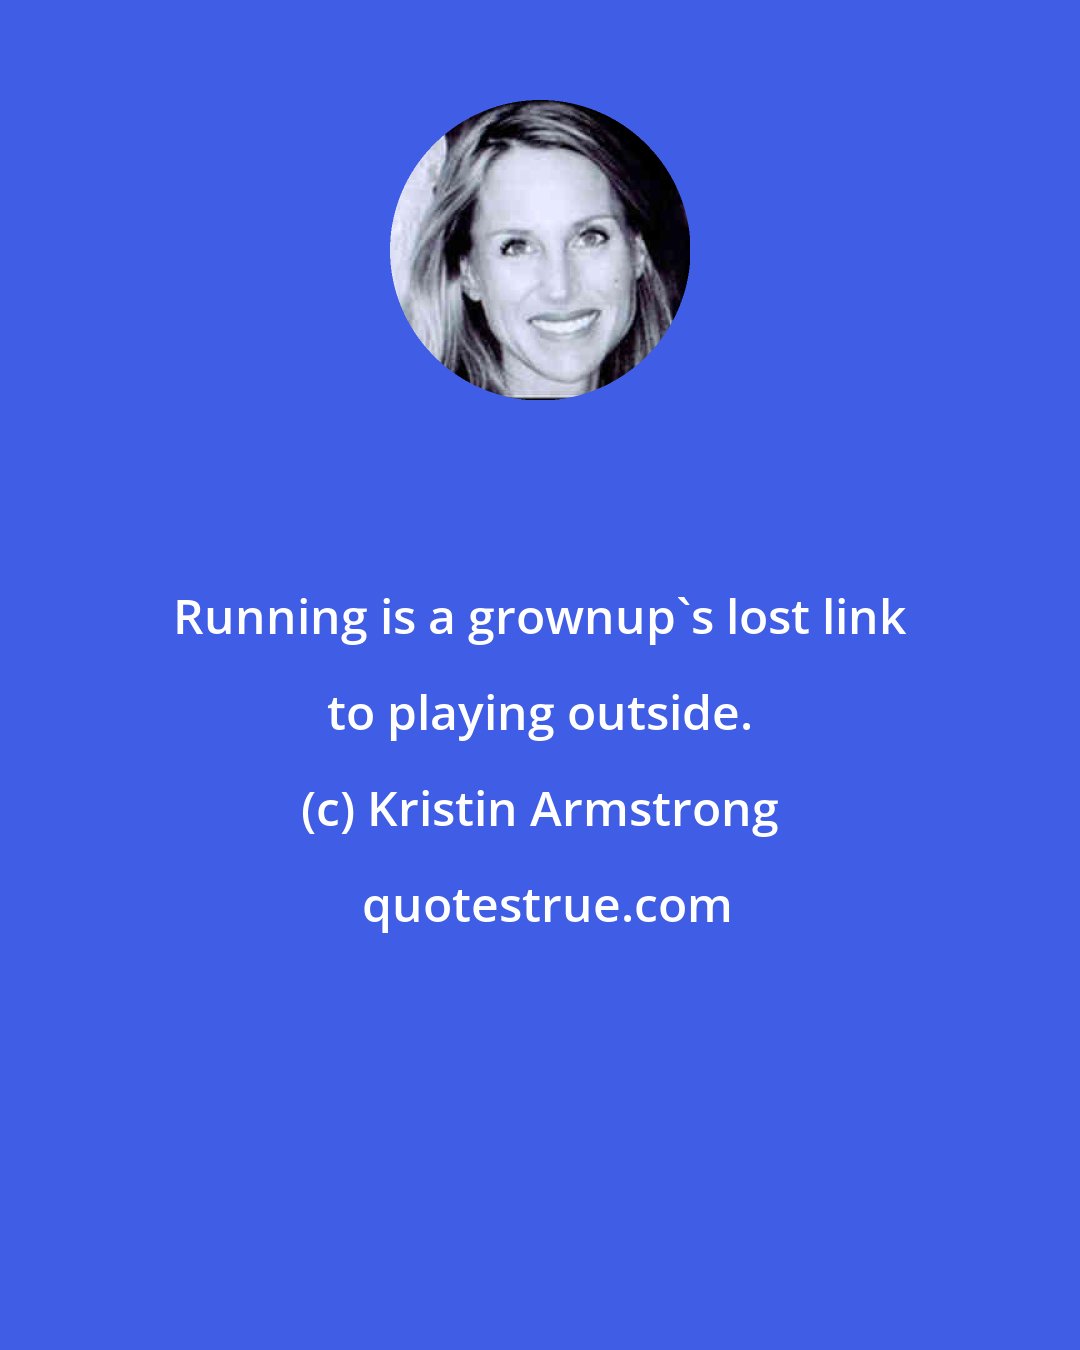 Kristin Armstrong: Running is a grownup's lost link to playing outside.